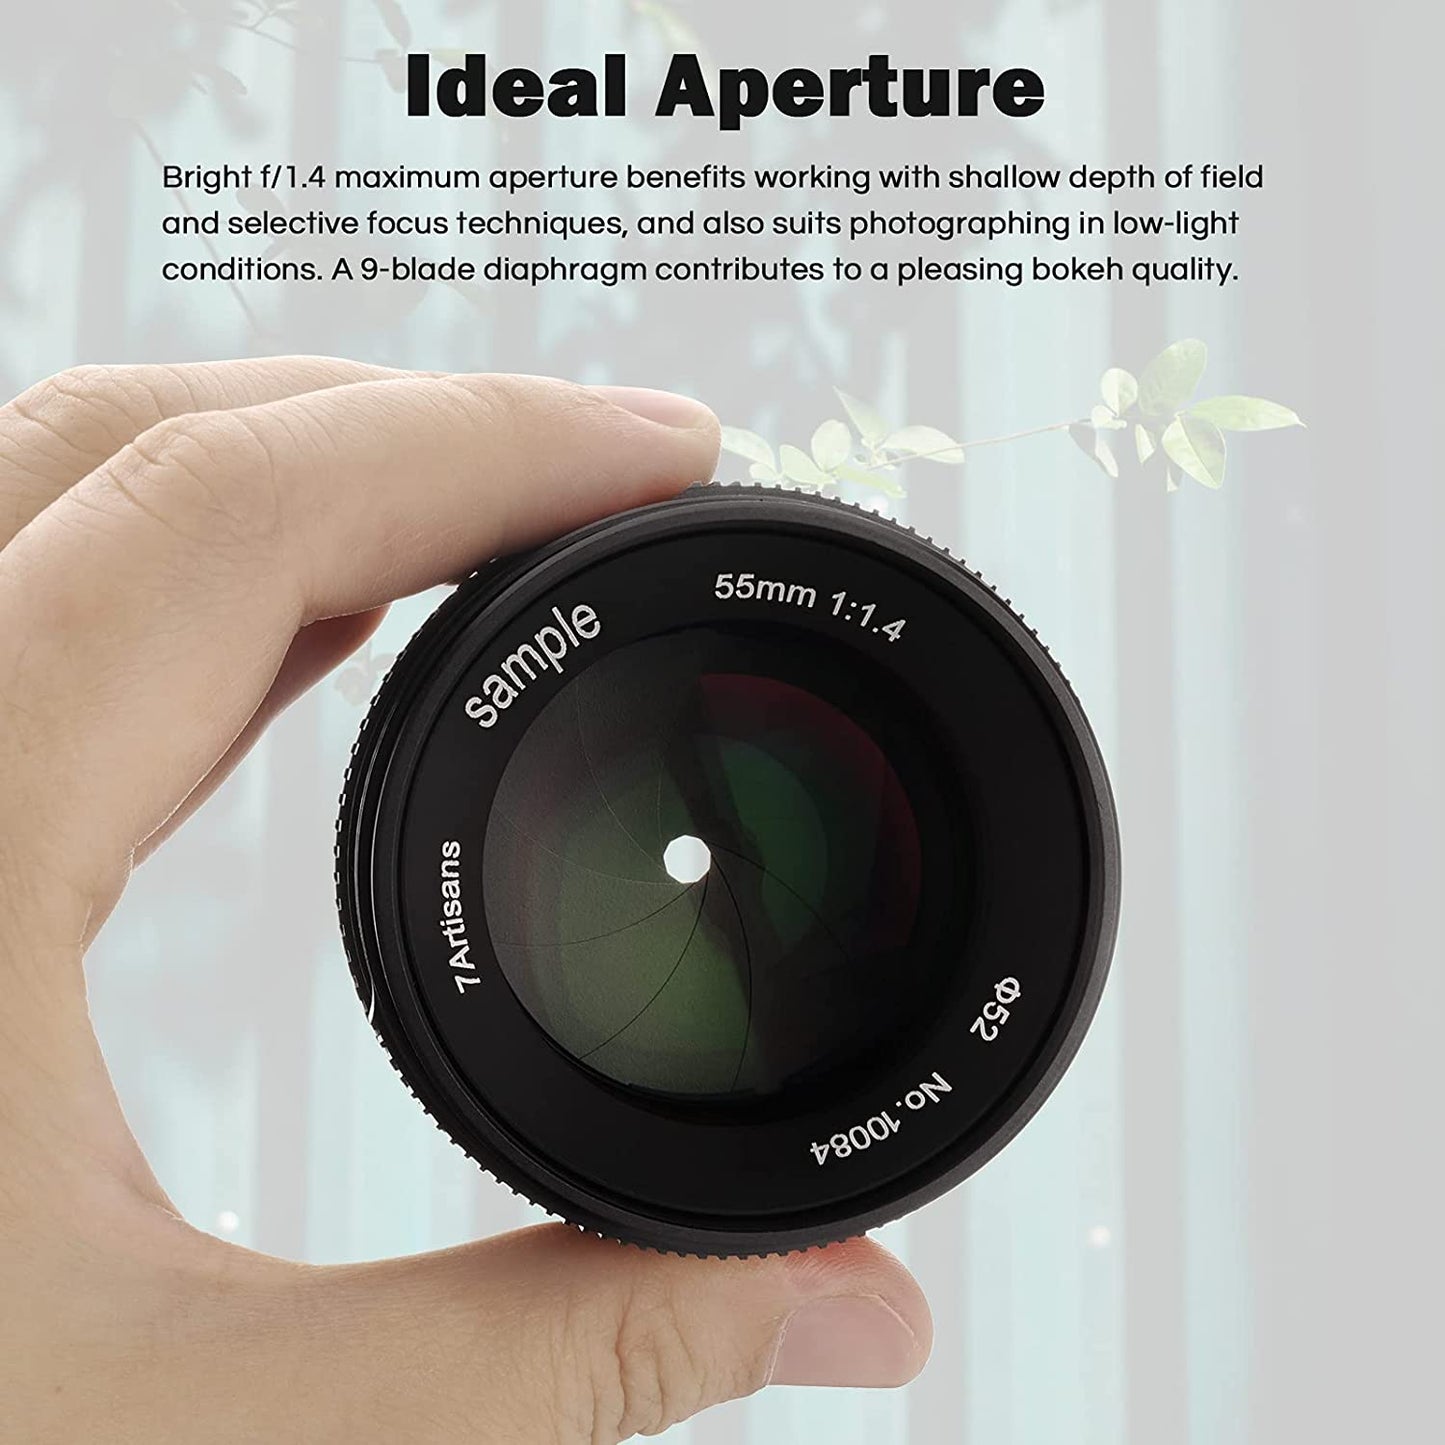 7Artisans 55mm f1.4 APS-C Manual Prime Lens (E-Mount) for Sony Mirrorless Cameras with Bokeh Effect